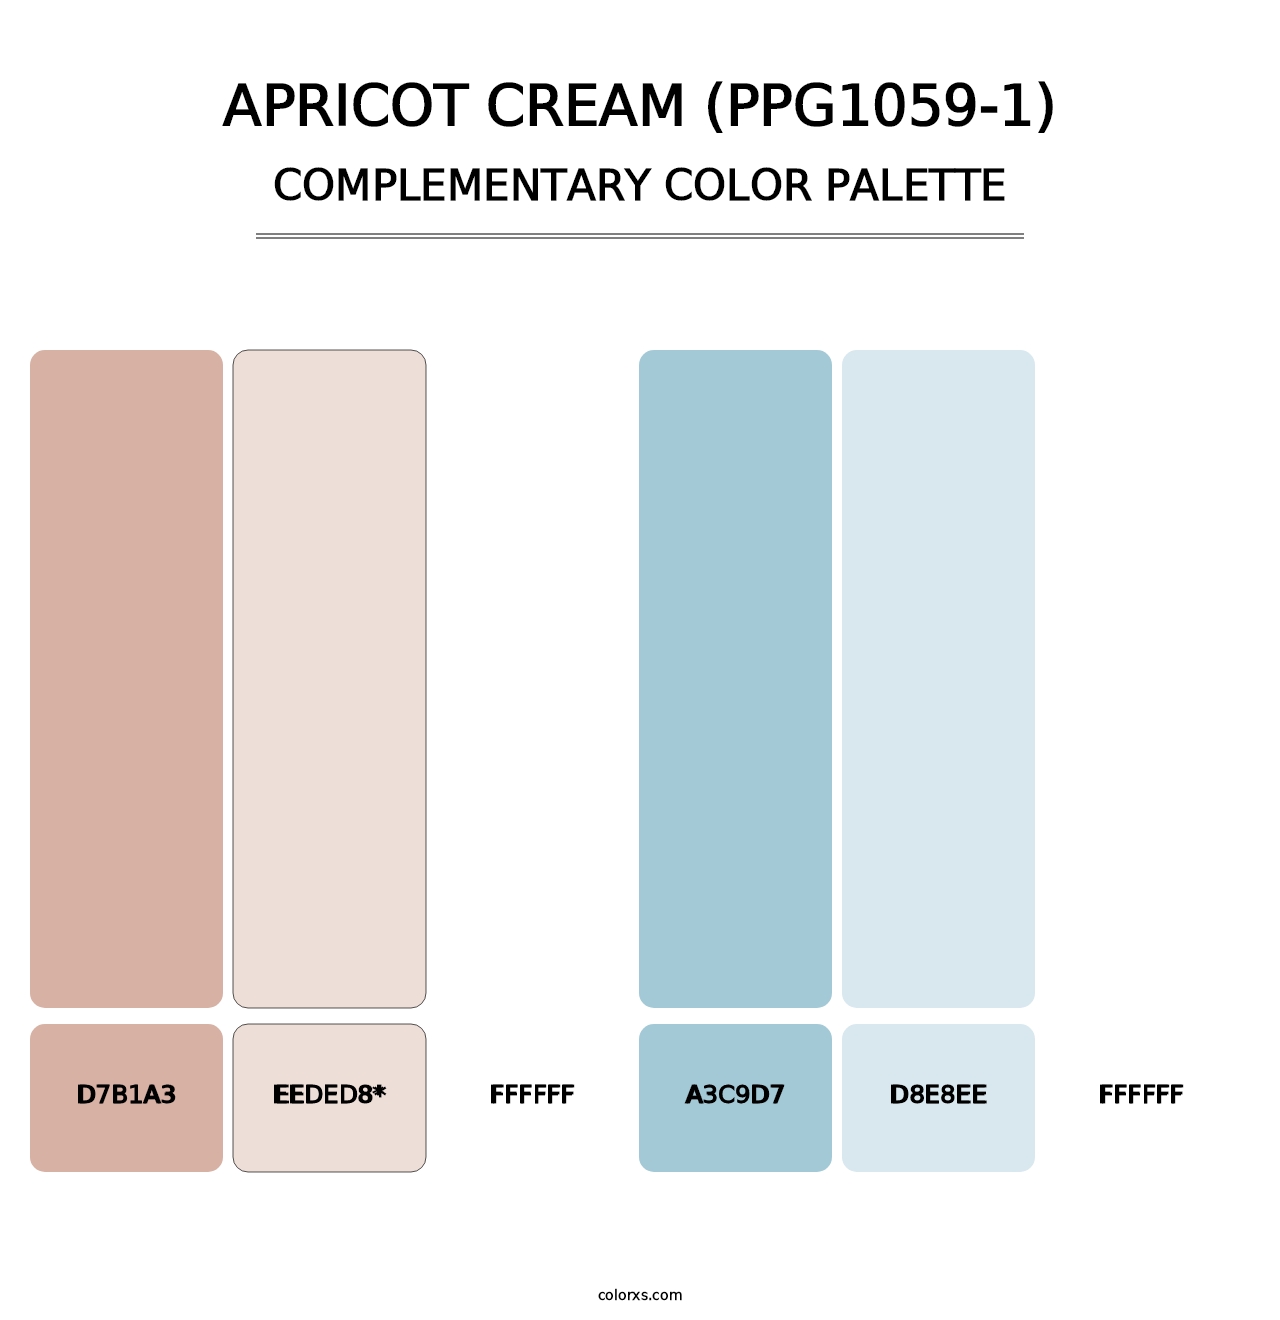 Apricot Cream (PPG1059-1) - Complementary Color Palette